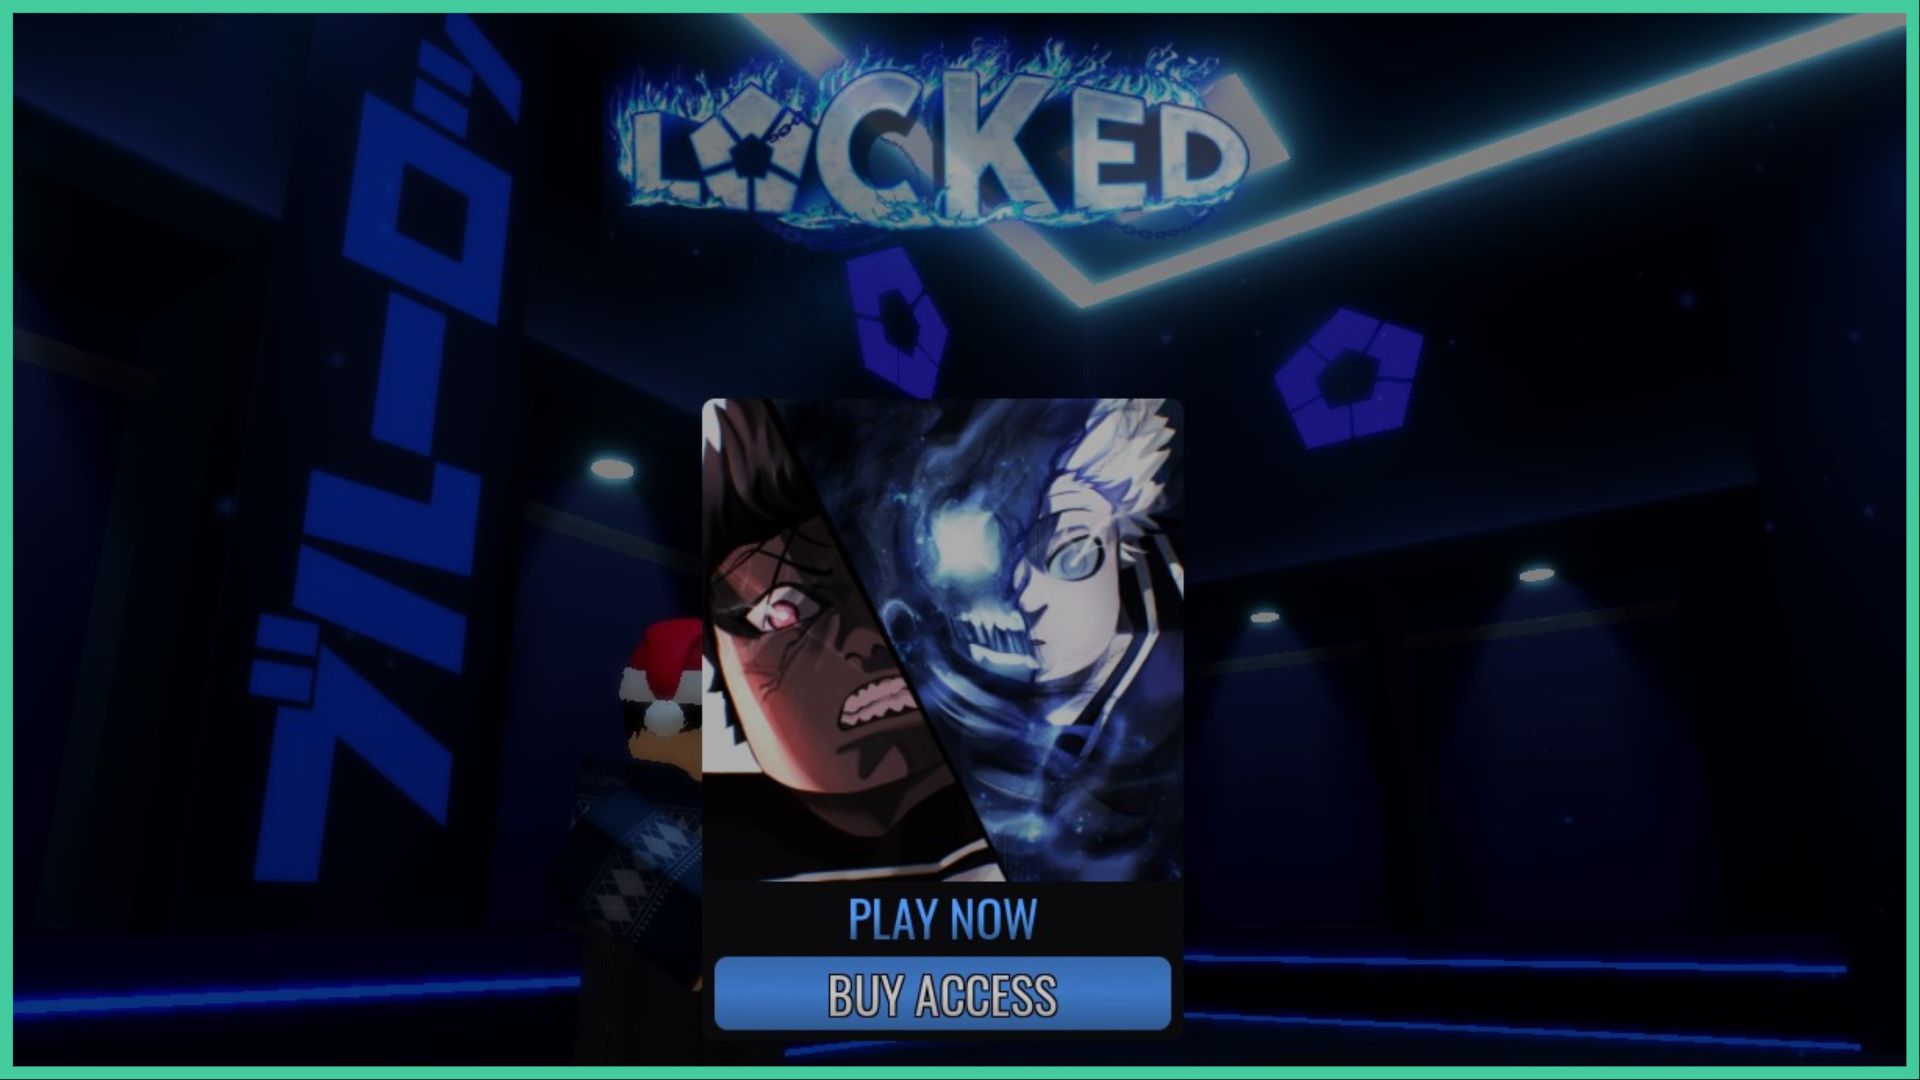 feature image for our roblox locked traits, the image features a screenshot from the start of the game, with the game's logo at the top surrounded by blue flames, as well as a square piece of art of roblox versions of blue lock characters with the button under that says "buy access"